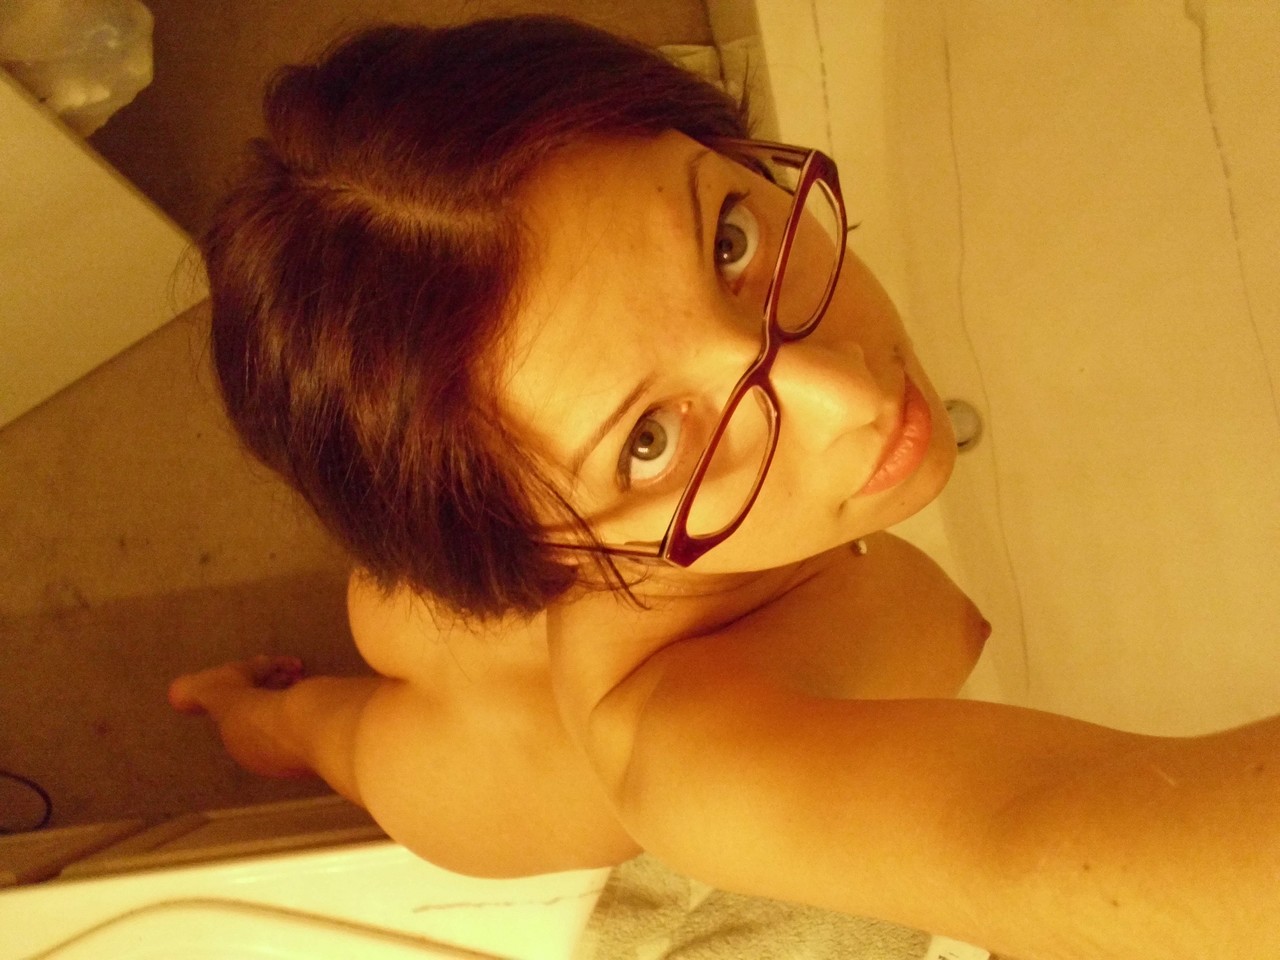 Attractive amateur teen shows her goodies while taking selfies in the bathroom 포르노 사진 #426903995